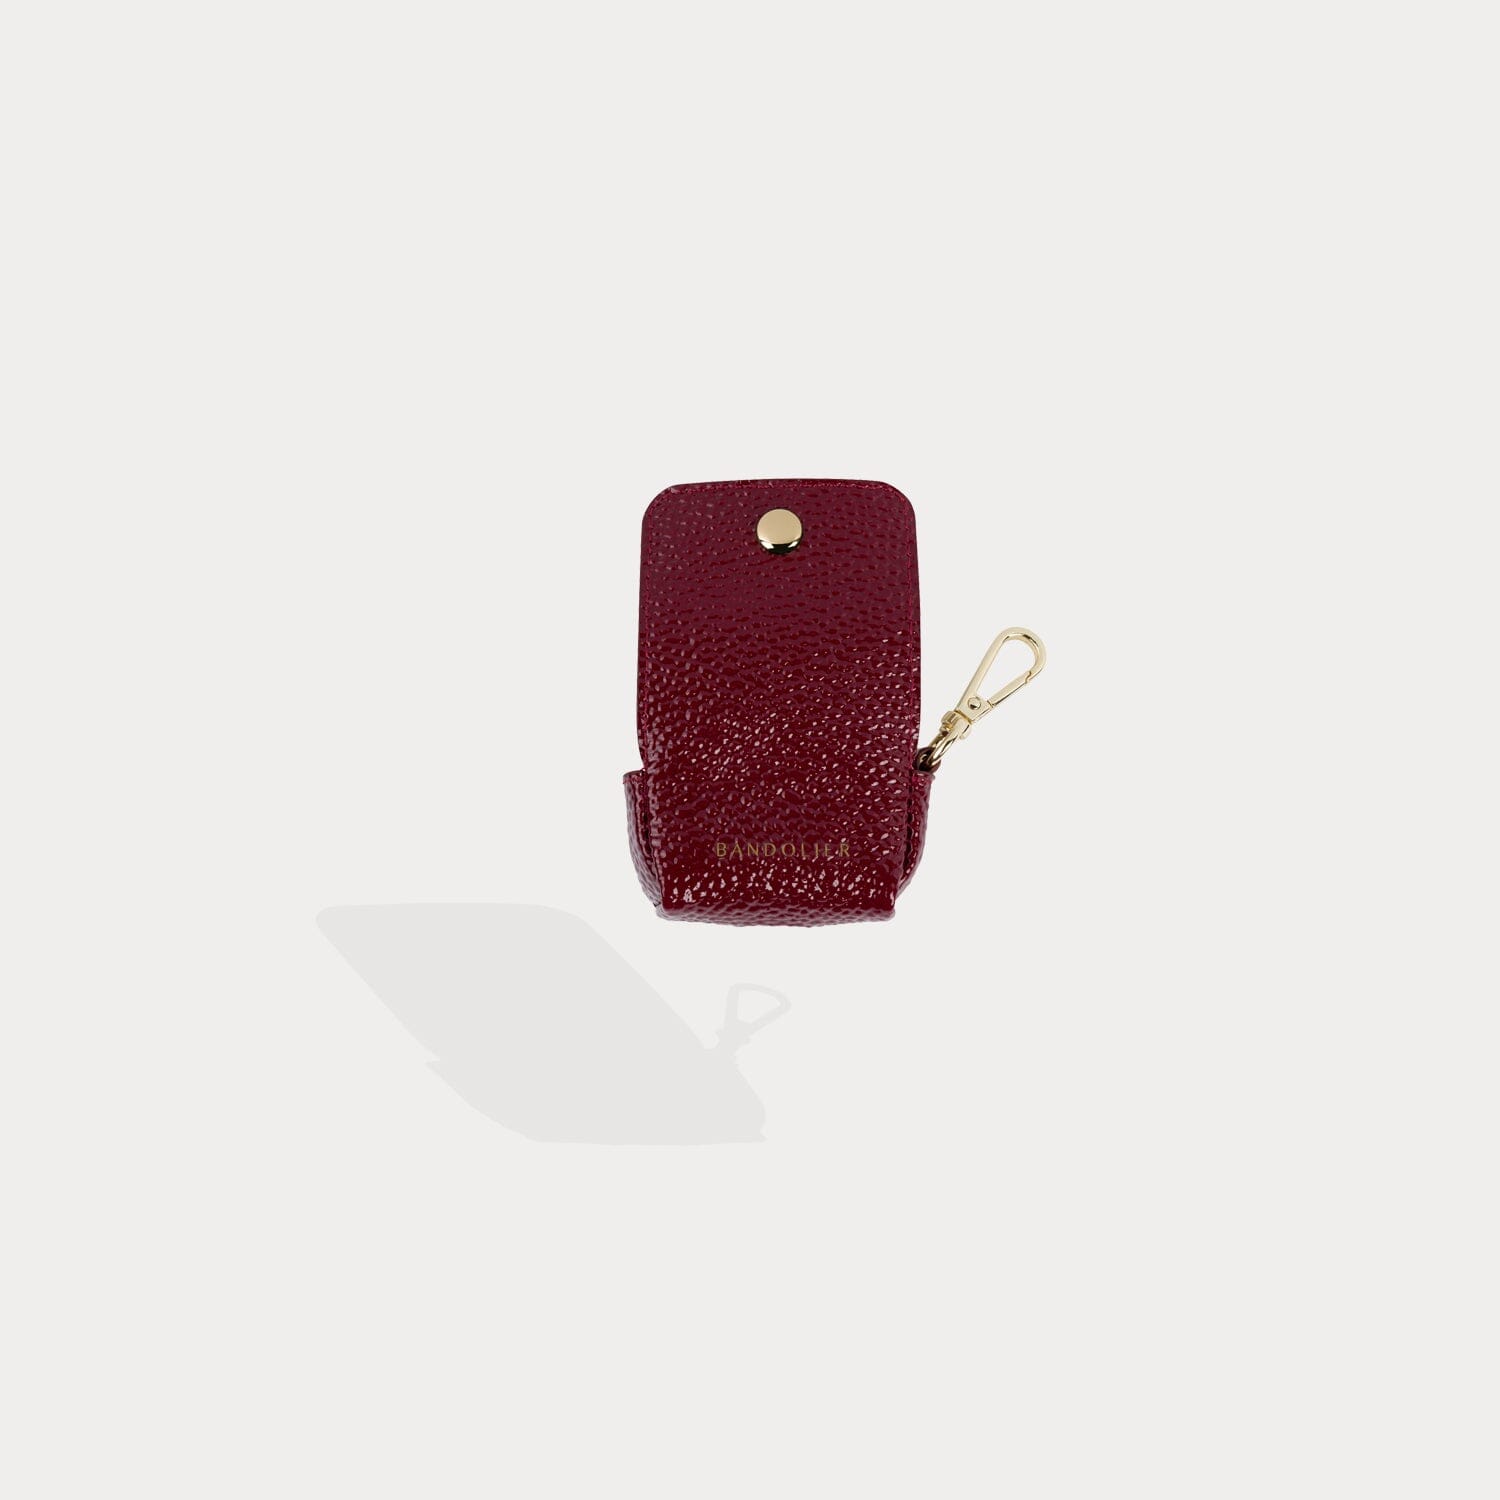 Avery AirPod Clip-On Pouch - Burgundy/Gold Pouch Core Bandolier 